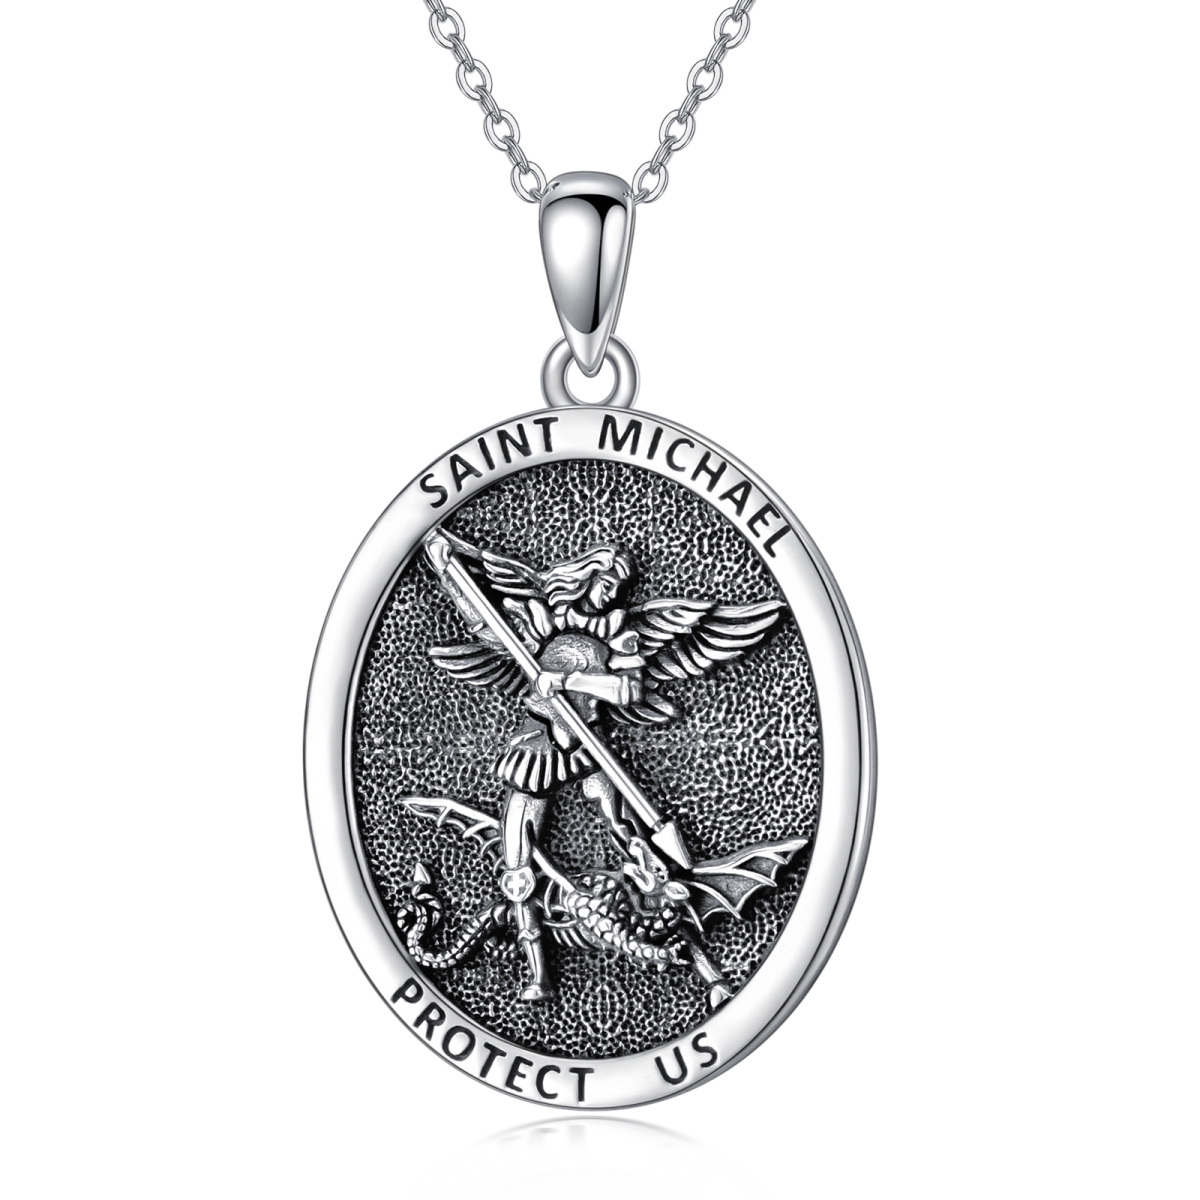 Sterling Silver Saint Michael Oval Shaped Pendant Necklace with Engraved Word for Men-1